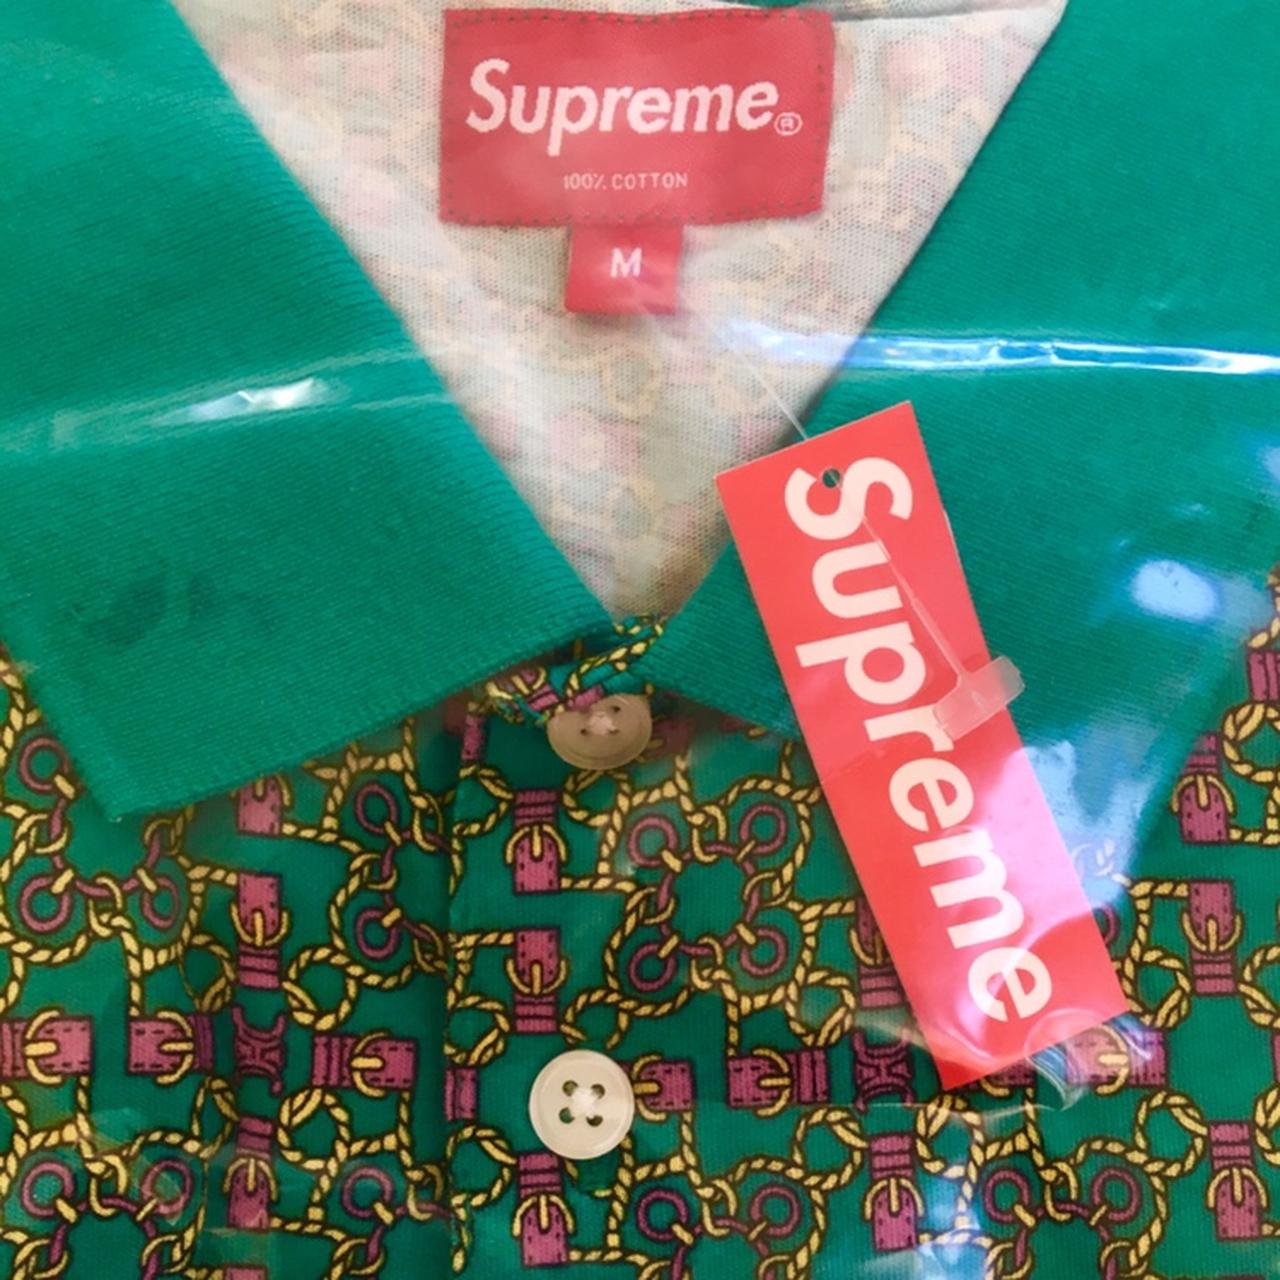 Supreme Bridle Print Polo - Teal, SS18, New, in bag...